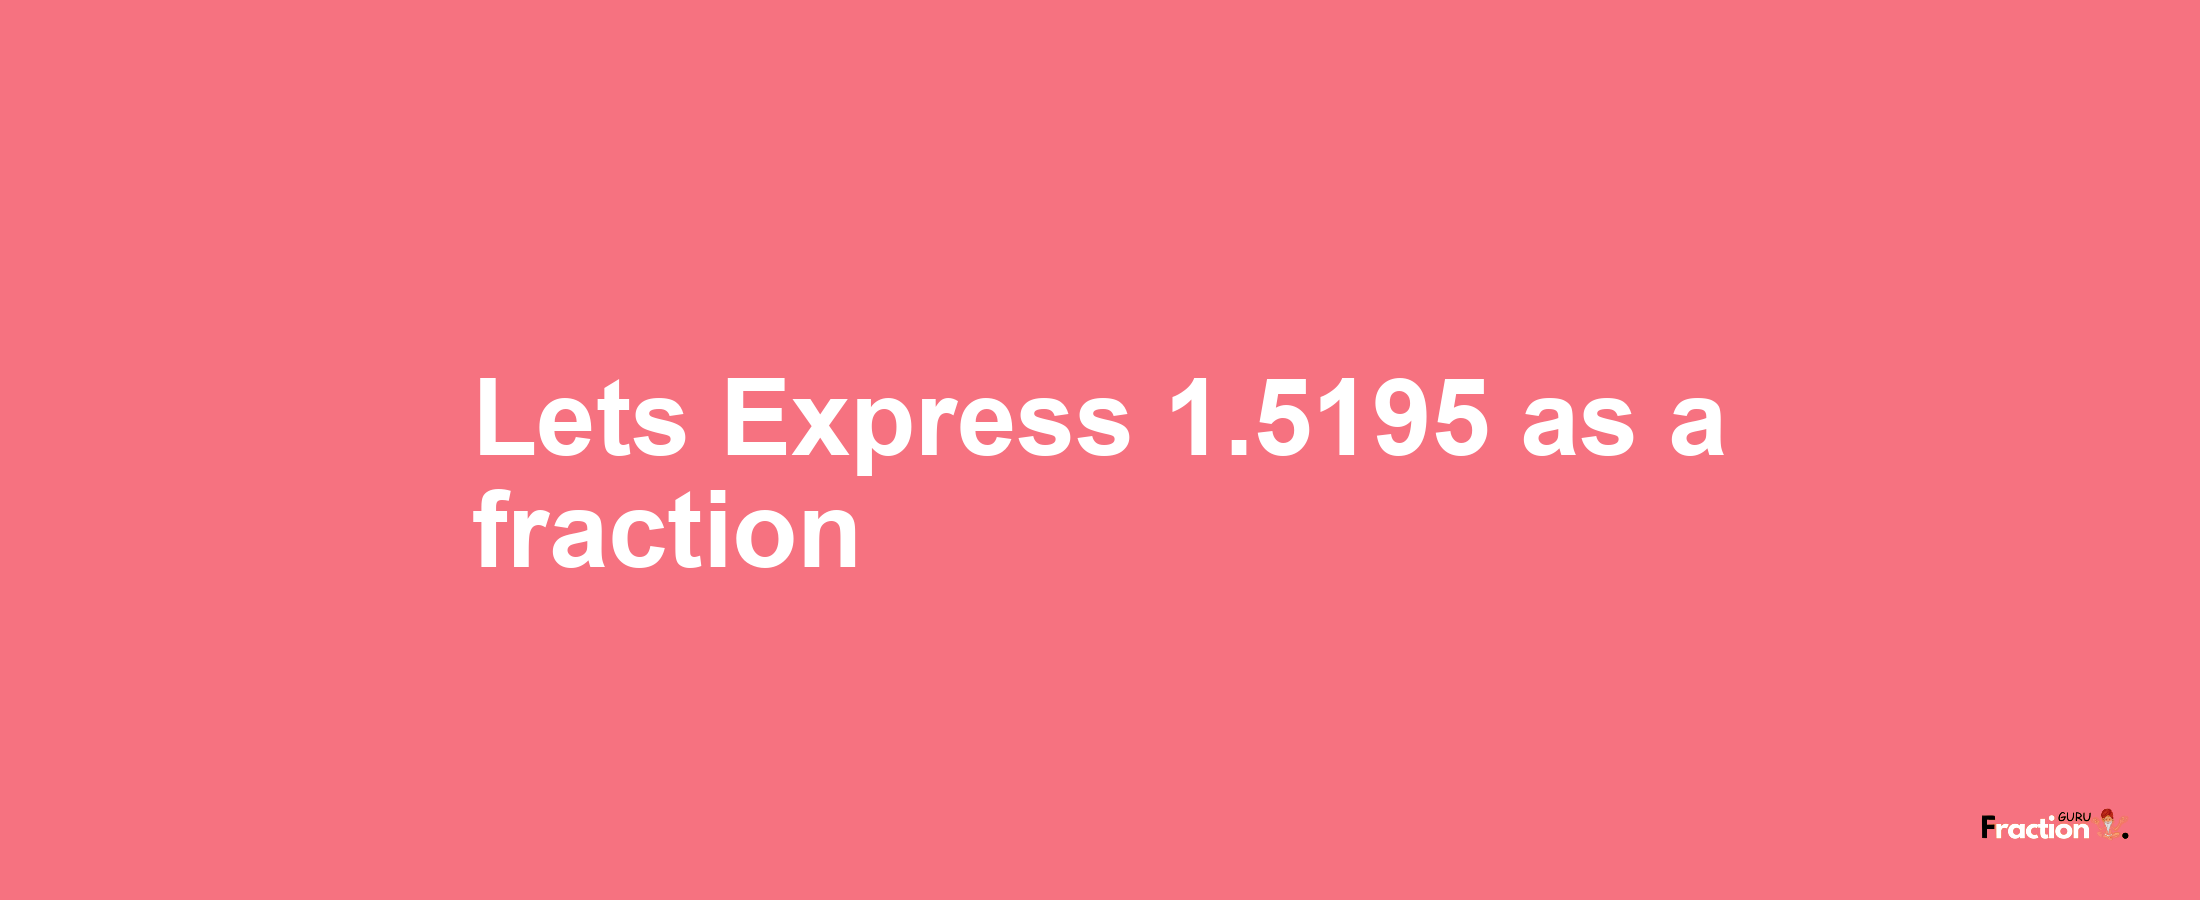 Lets Express 1.5195 as afraction